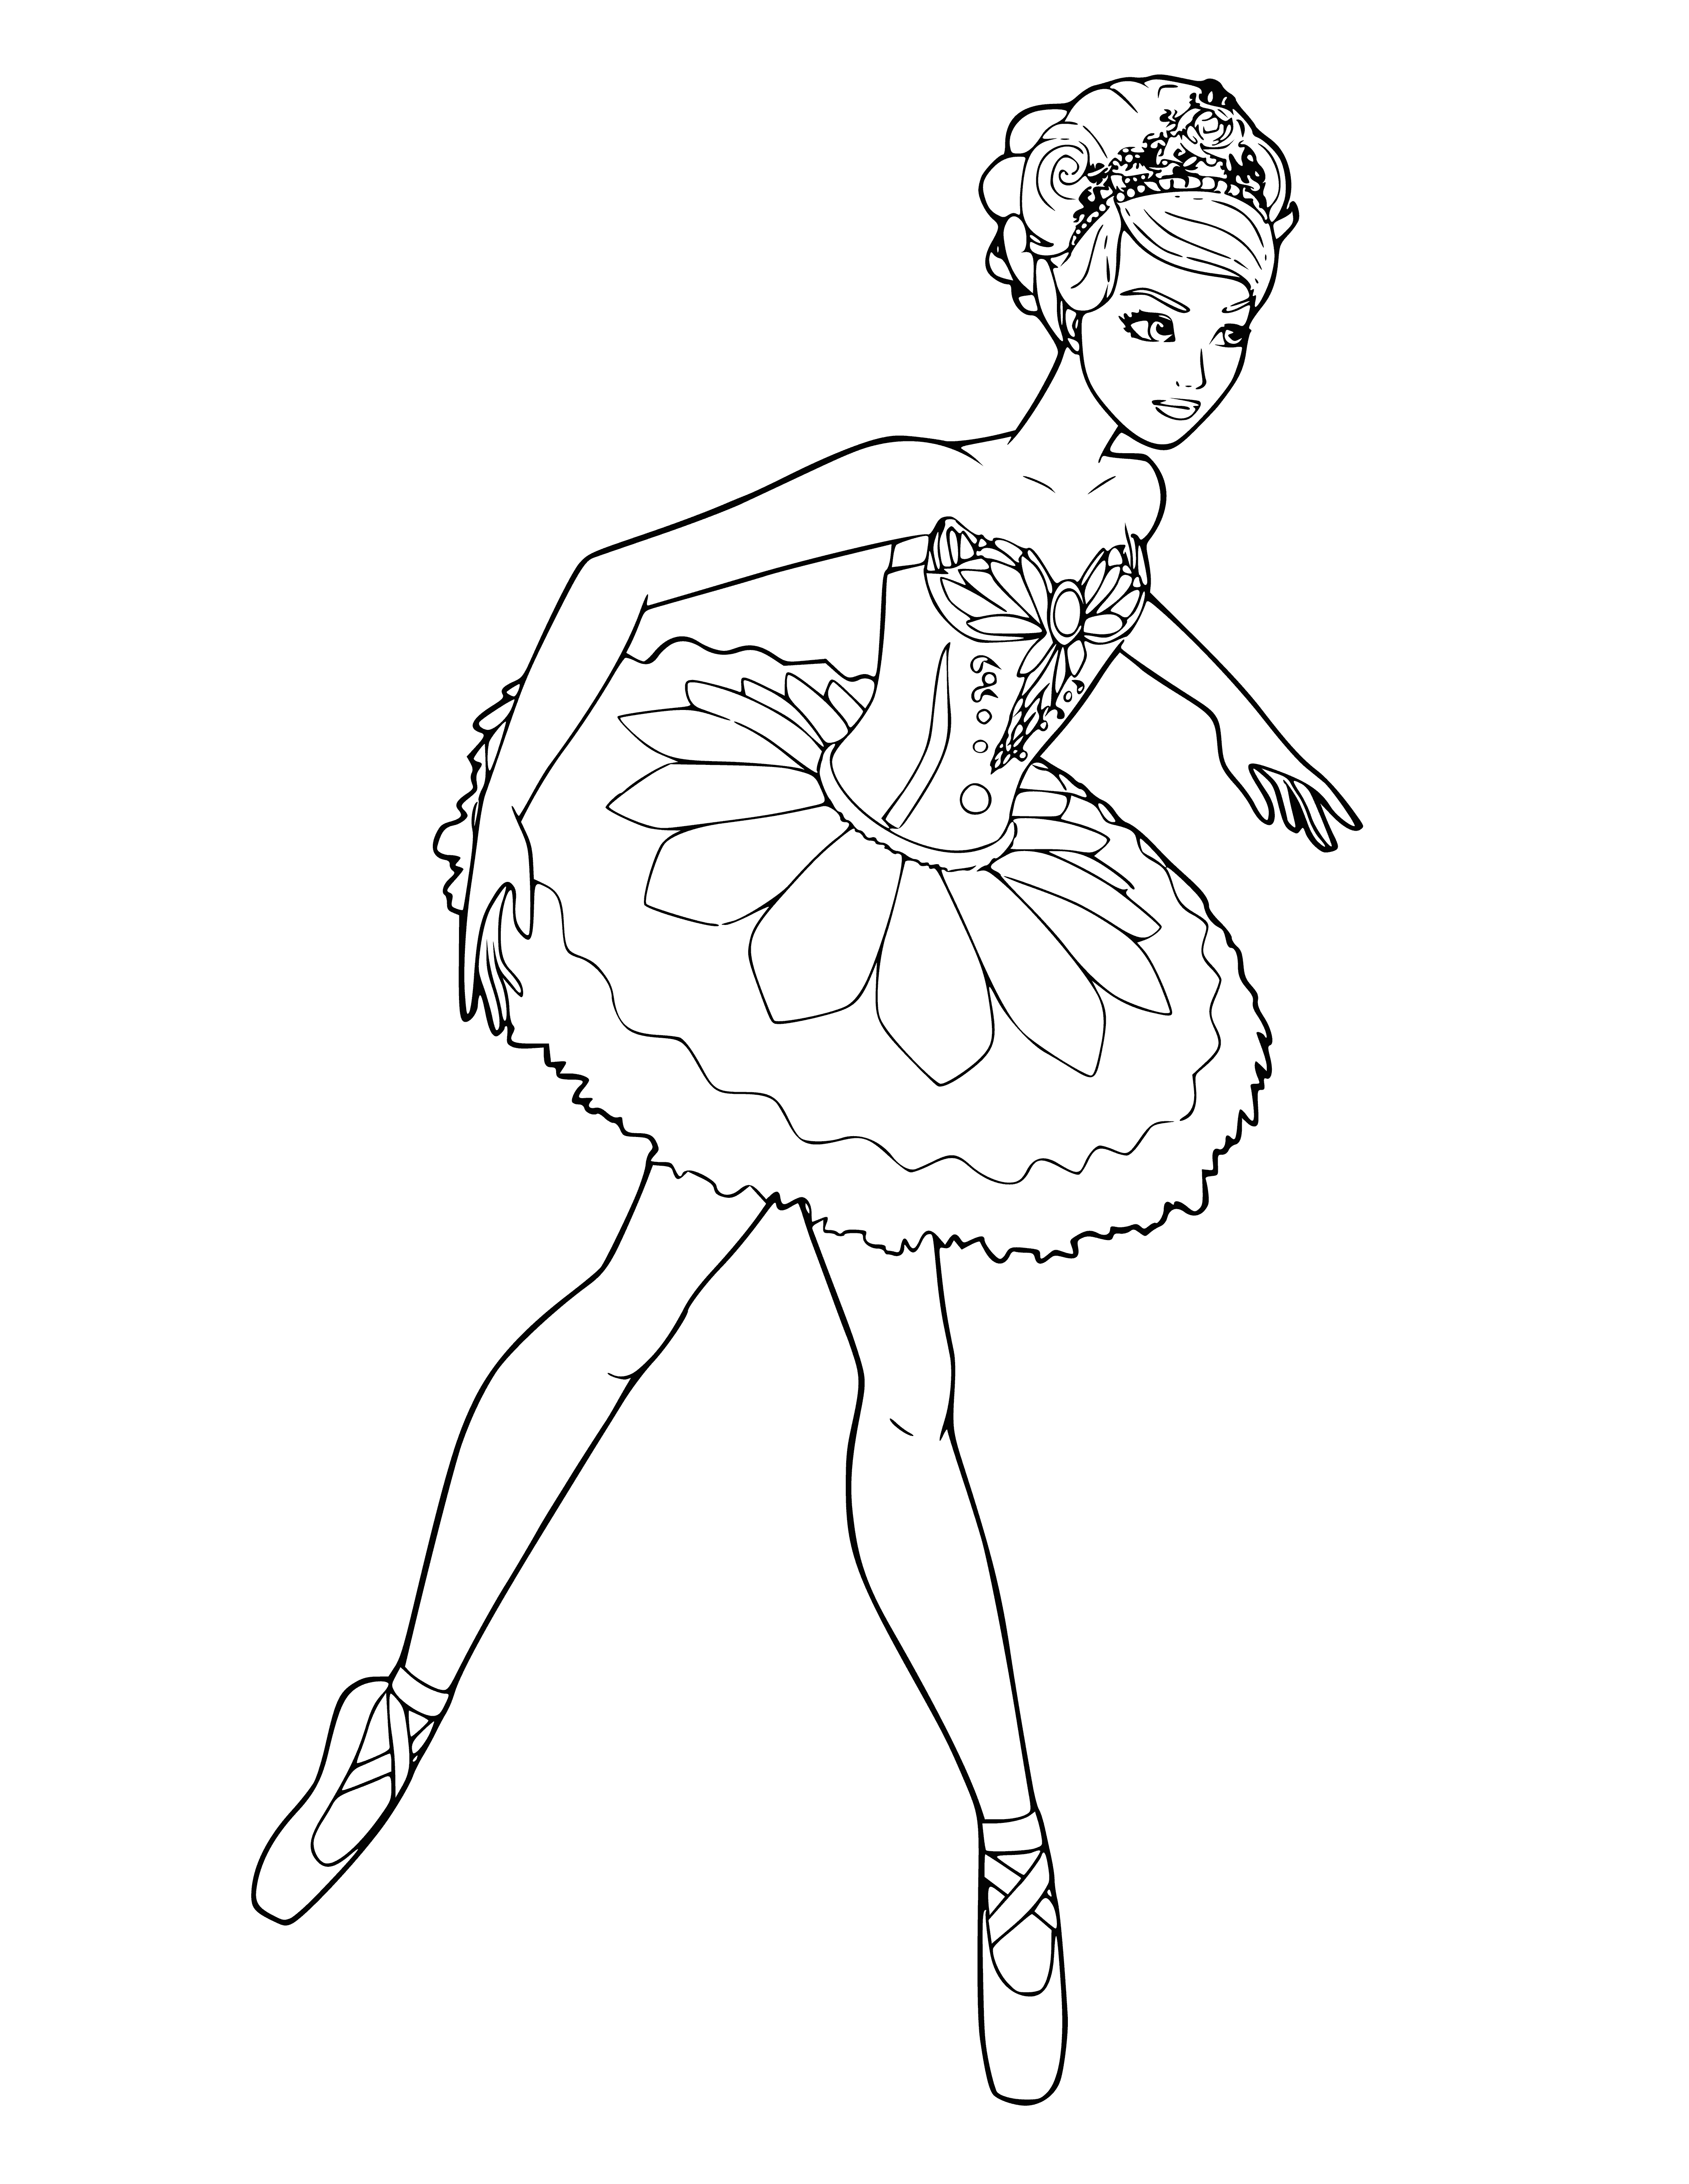 Barbie ballerina coloring page